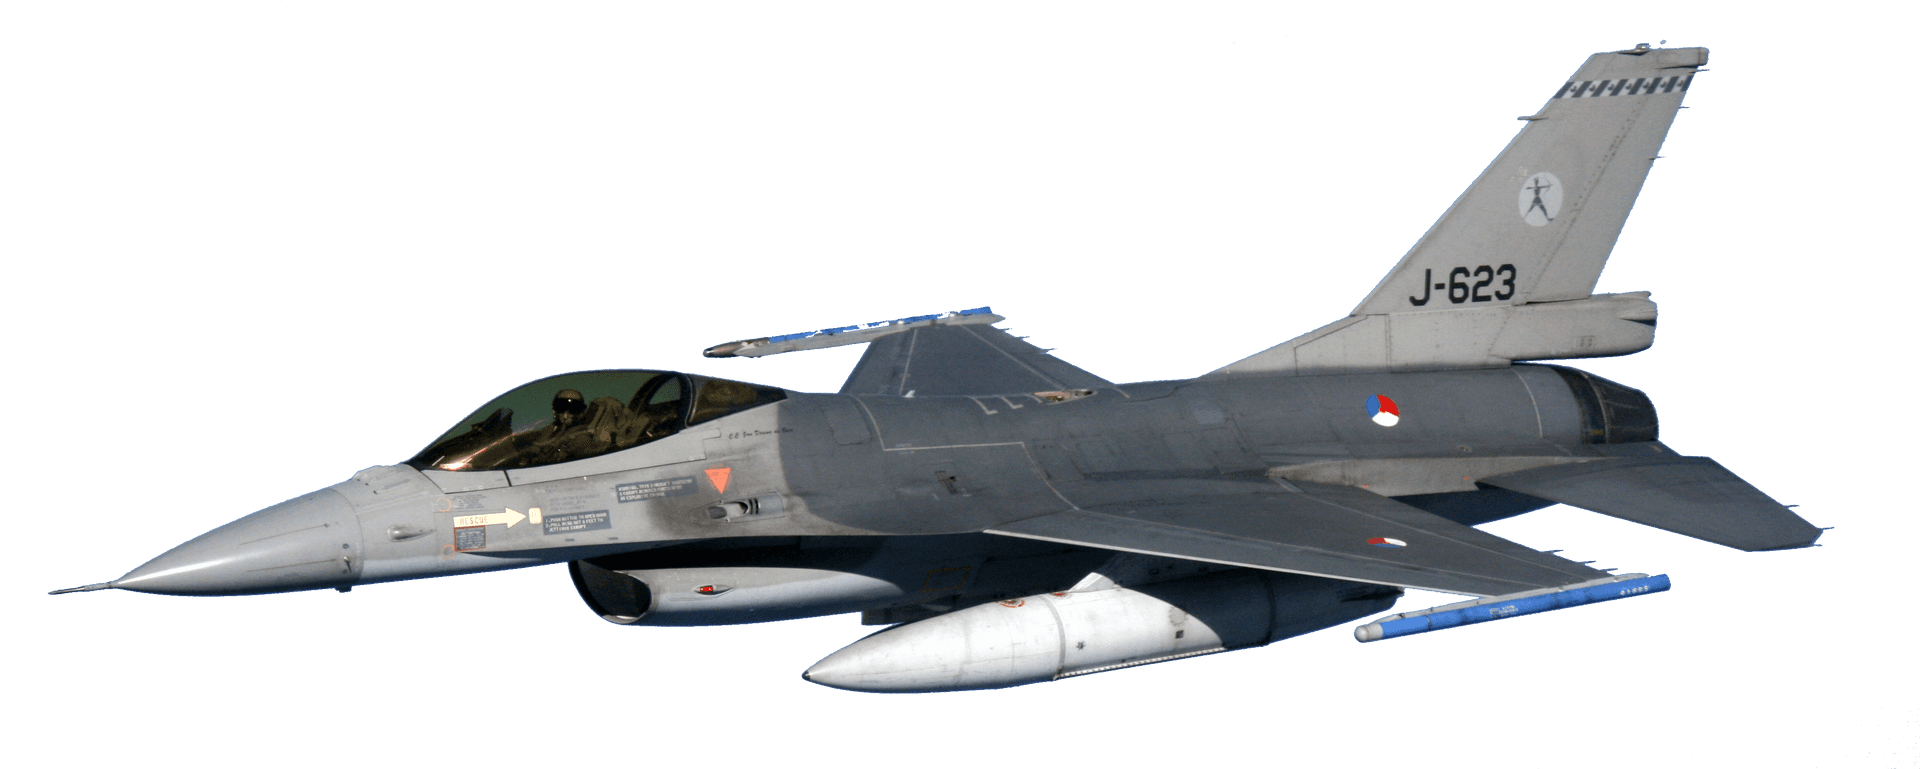 Military Jet Fighter In Flight PNG image